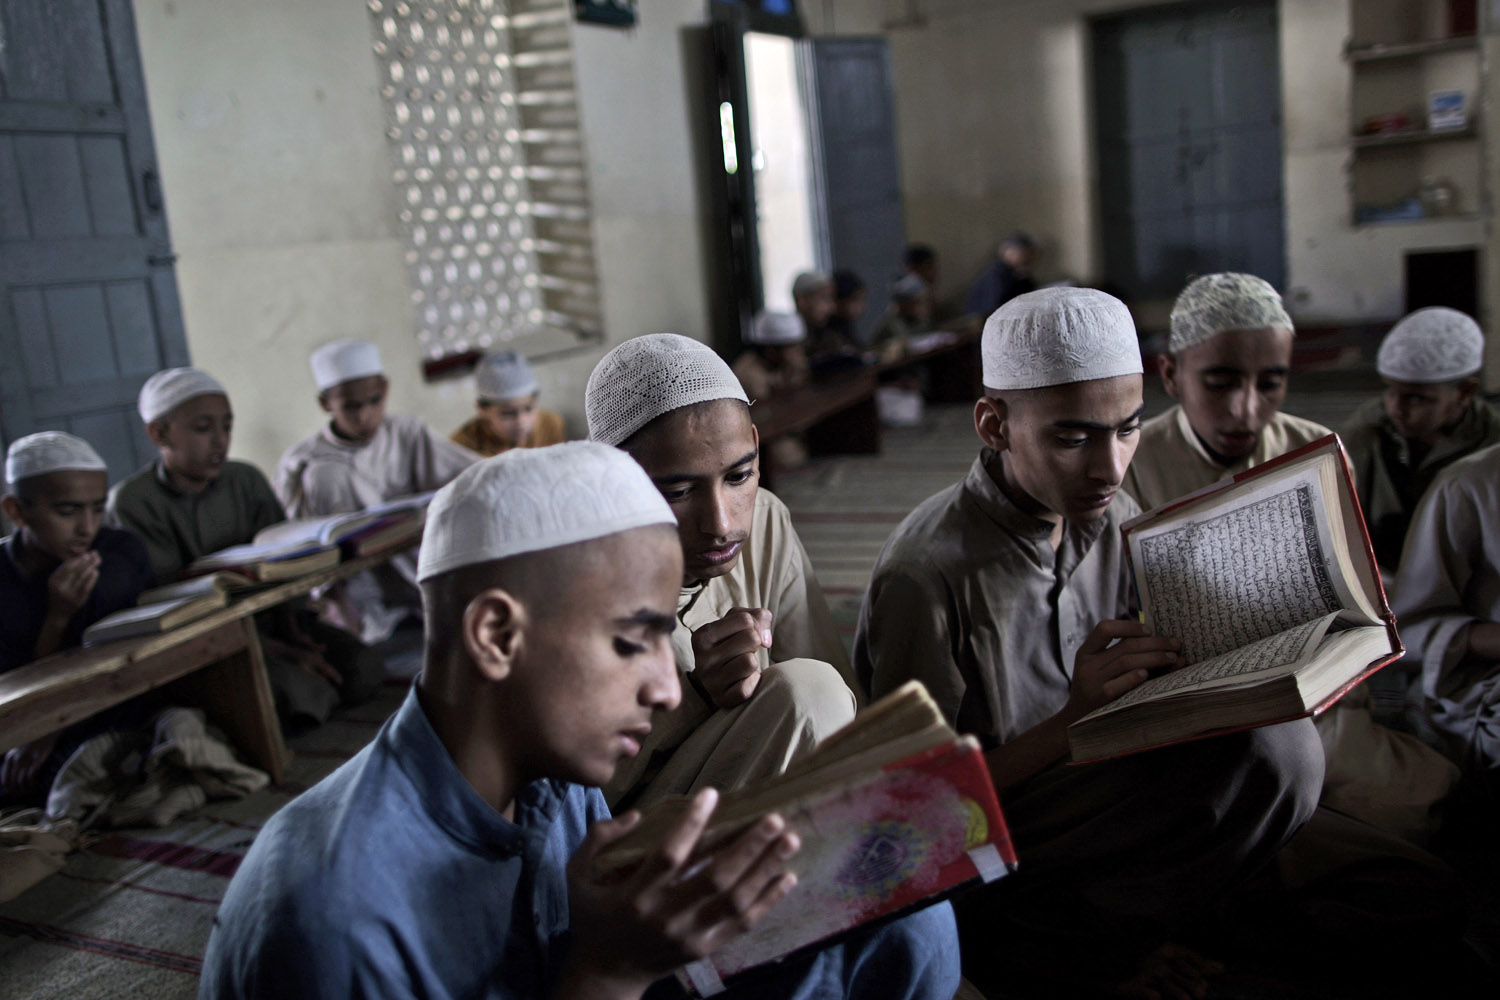 March 26, 2013. Pakistani students of a madrassa, or Islamic school, recite verses of the holy Quran, in Islamabad.